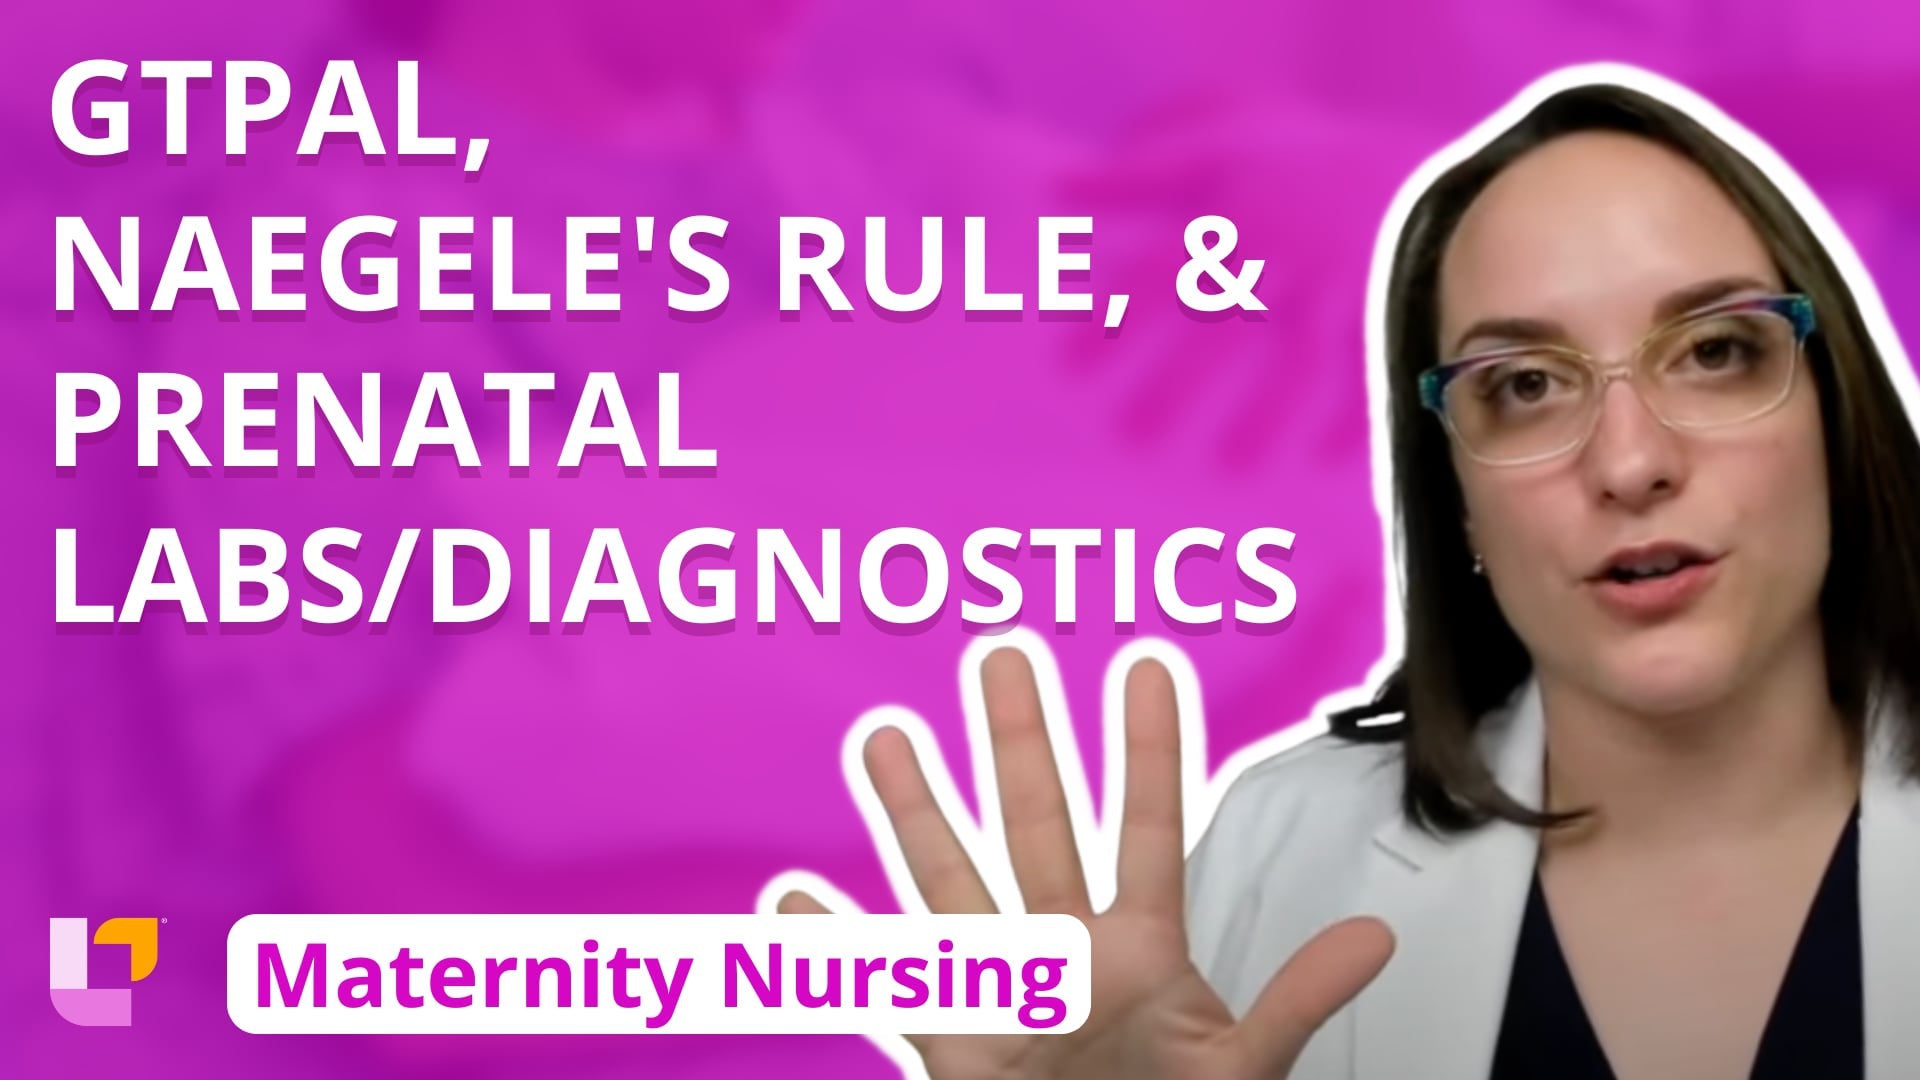 Maternity - Pregnancy, part 3: GTPAL, Naegele's Rule, and Prenatal Labs/Diagnostics - LevelUpRN